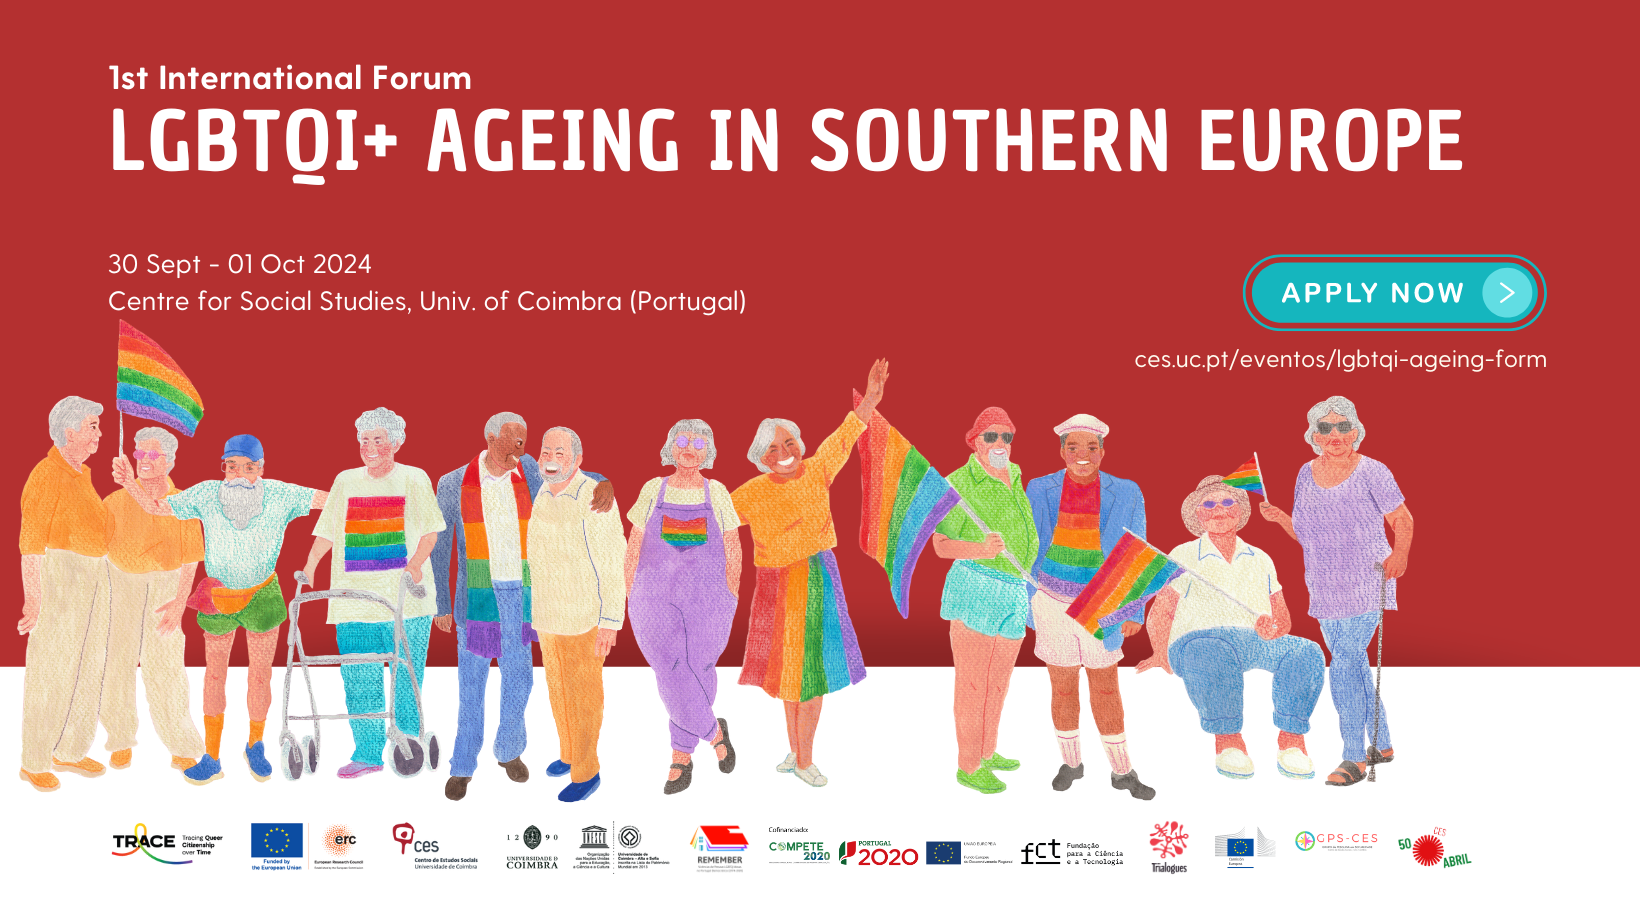 LGBTQI+ Ageing in Southern Europe<span id="edit_45208"><script>$(function() { $('#edit_45208').load( "/myces/user/editobj.php?tipo=evento&id=45208" ); });</script></span>